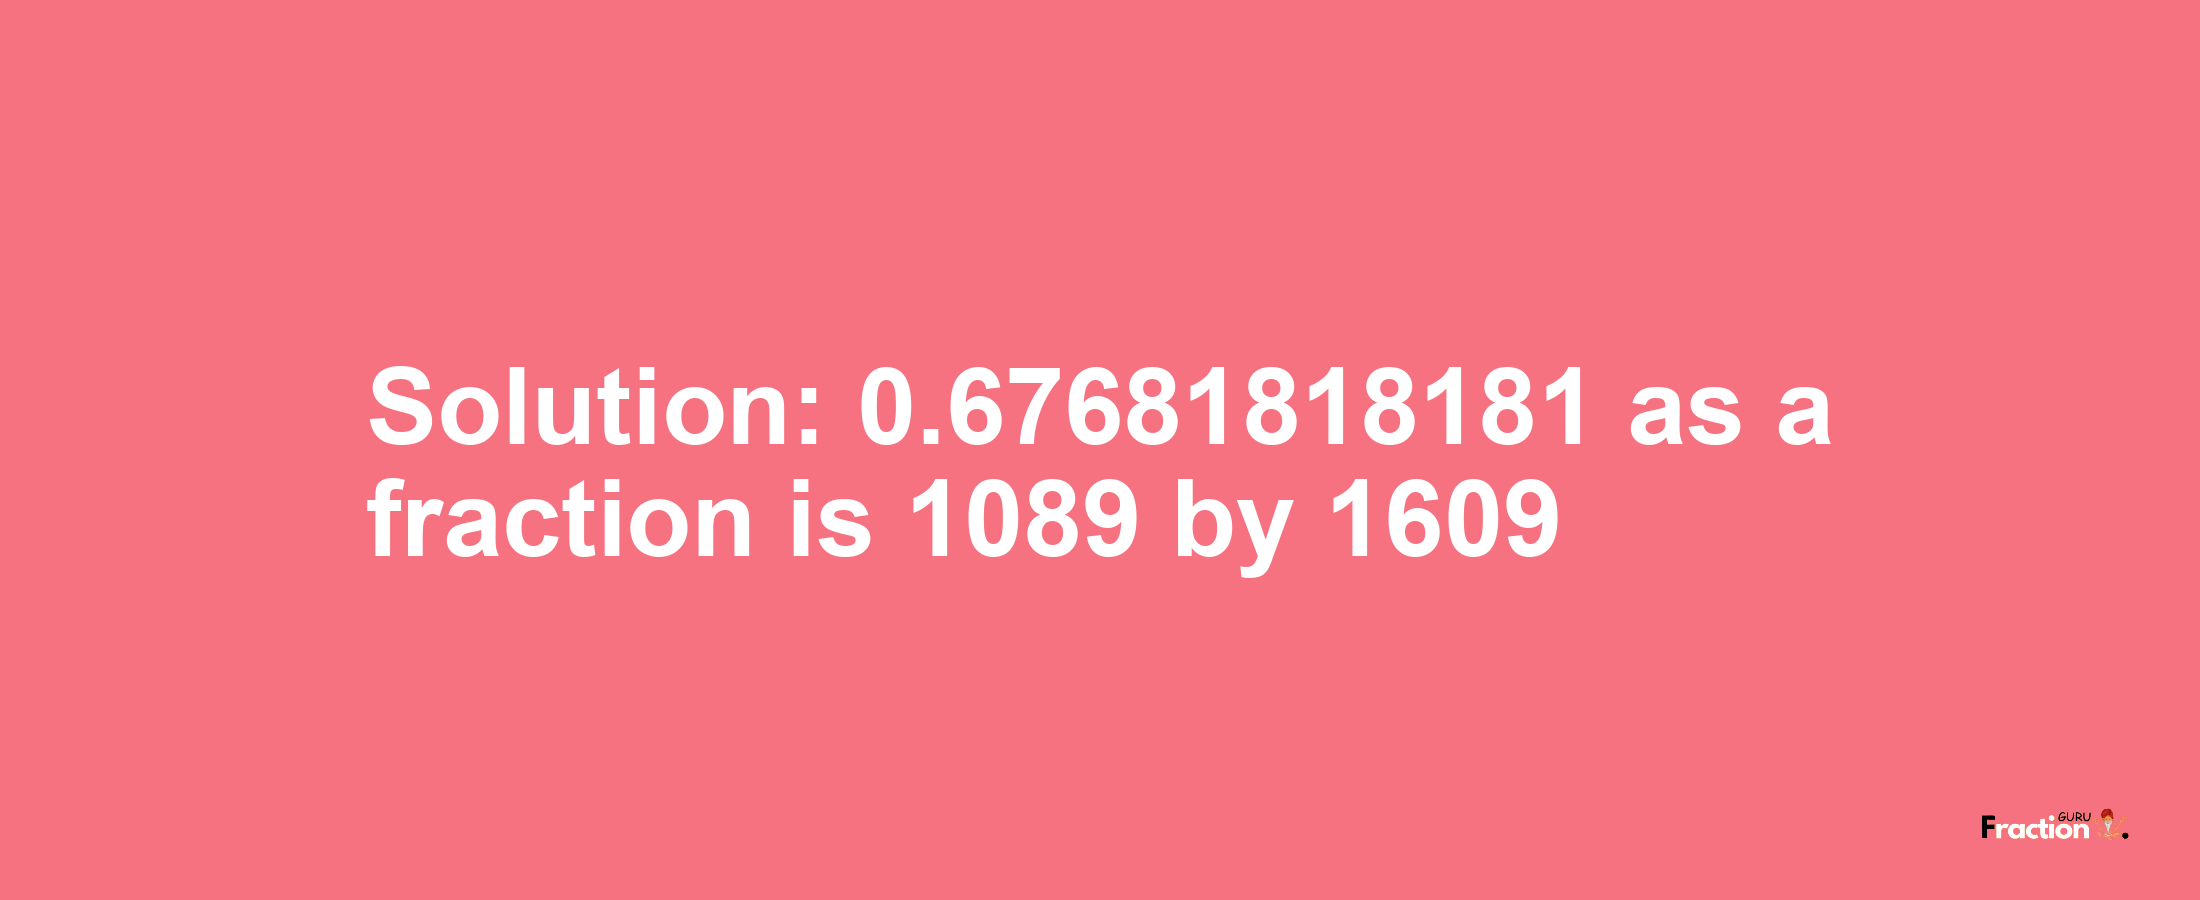 Solution:0.67681818181 as a fraction is 1089/1609